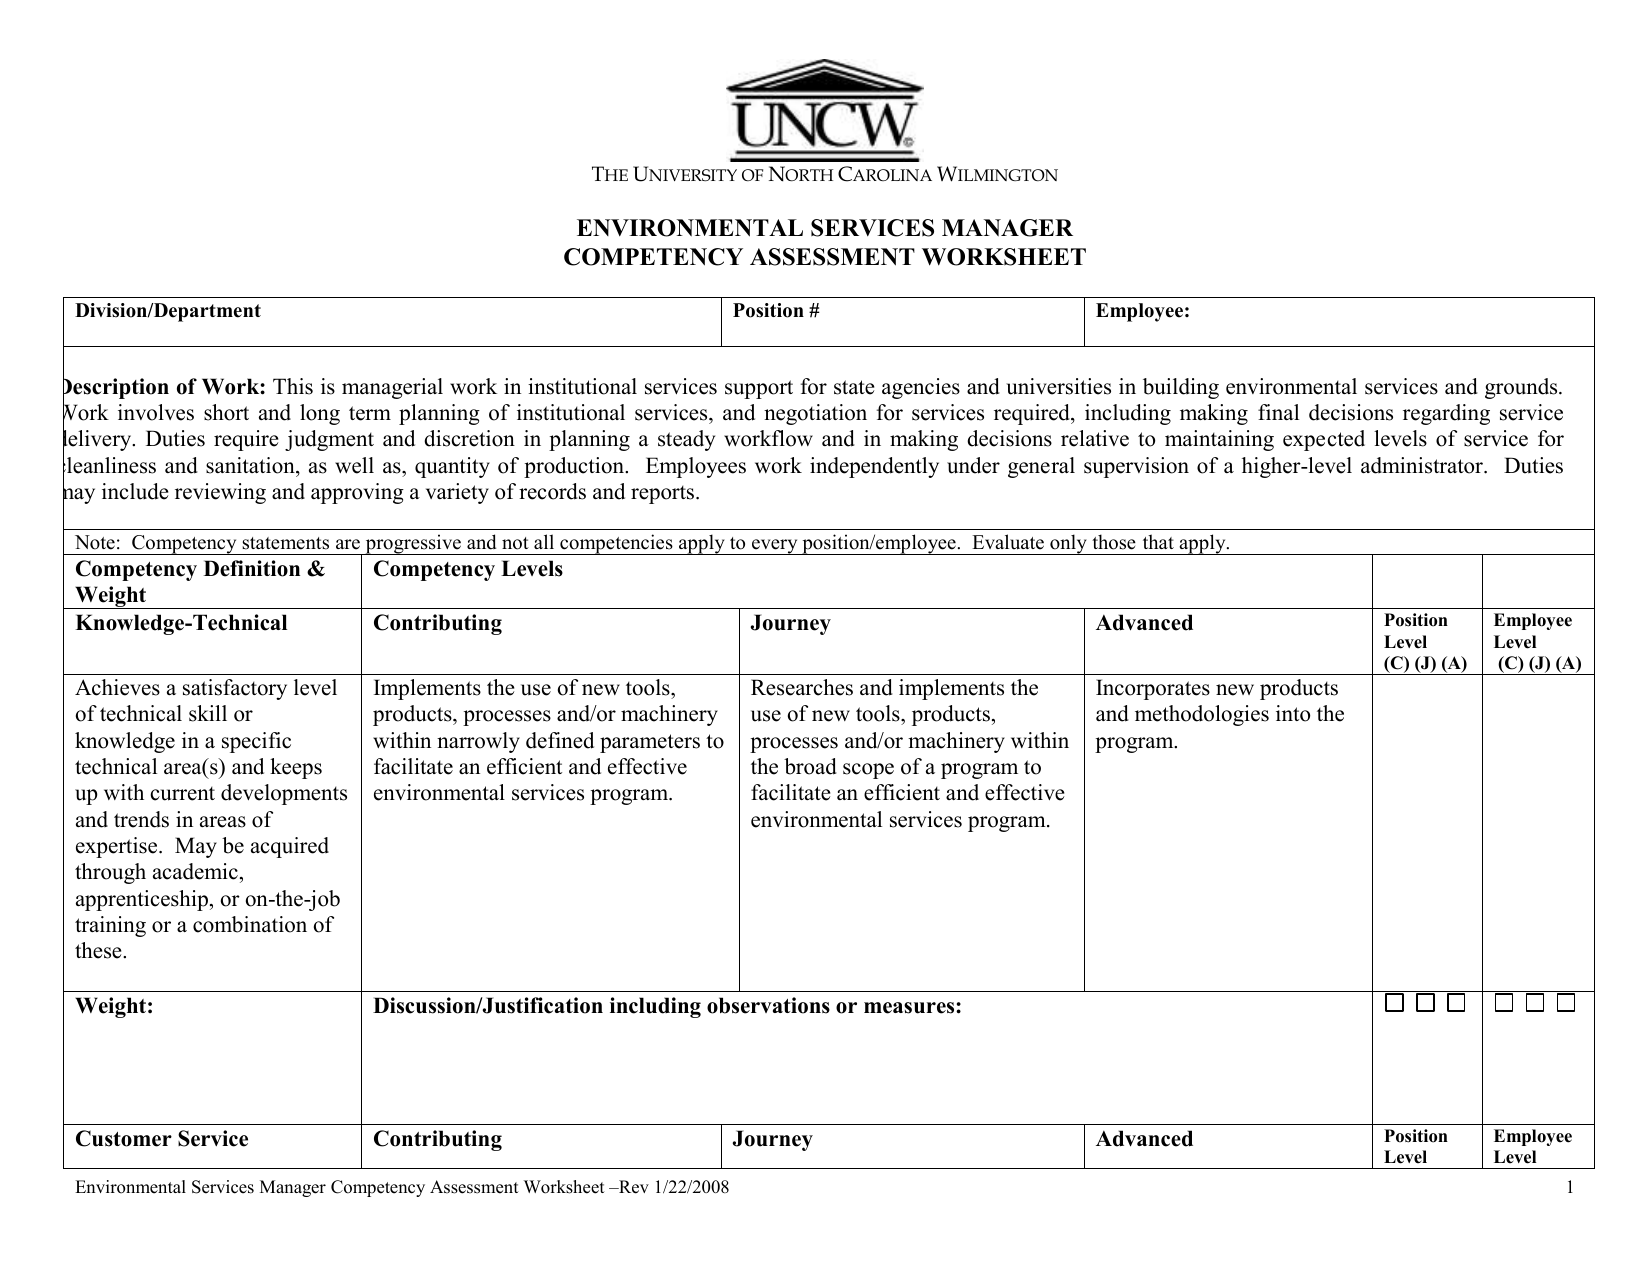 ENVIRONMENTAL SERVICES MANAGER COMPETENCY Throughout Job Skills Assessment Worksheet